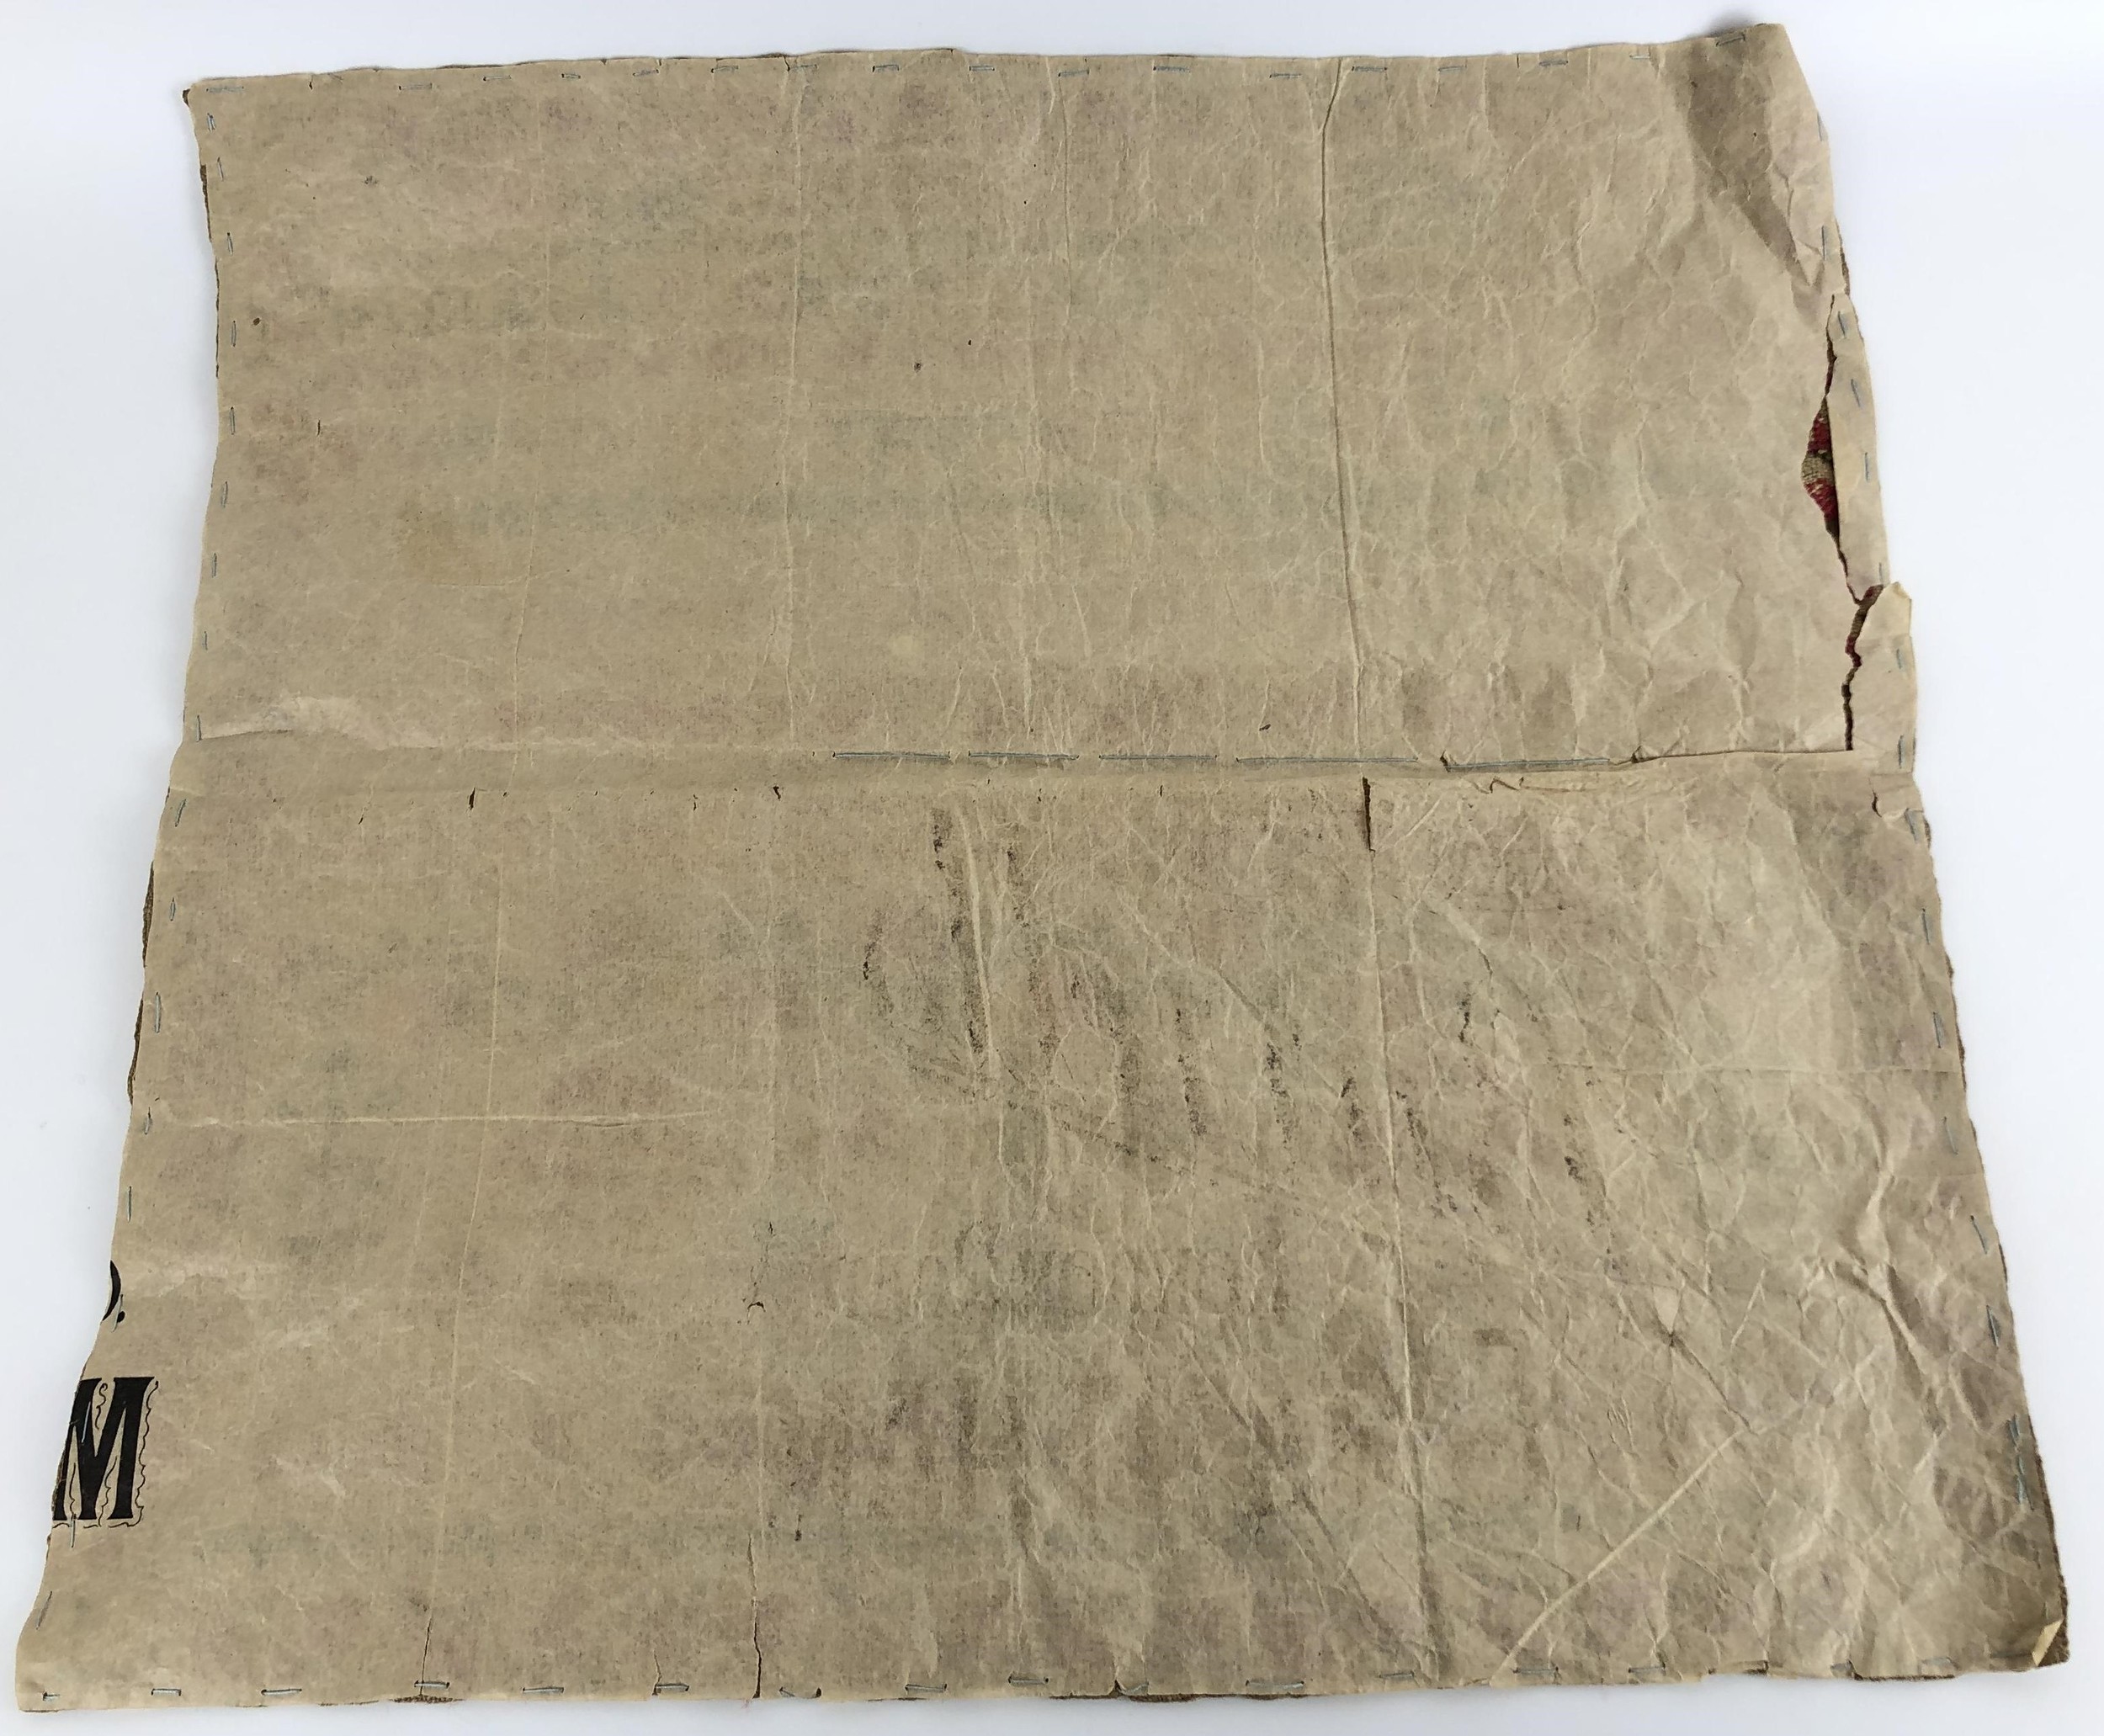 A 19th century sampler, signed Sarah Garton, aged 7, dated 1839, 42 x 42 cm - Image 2 of 2